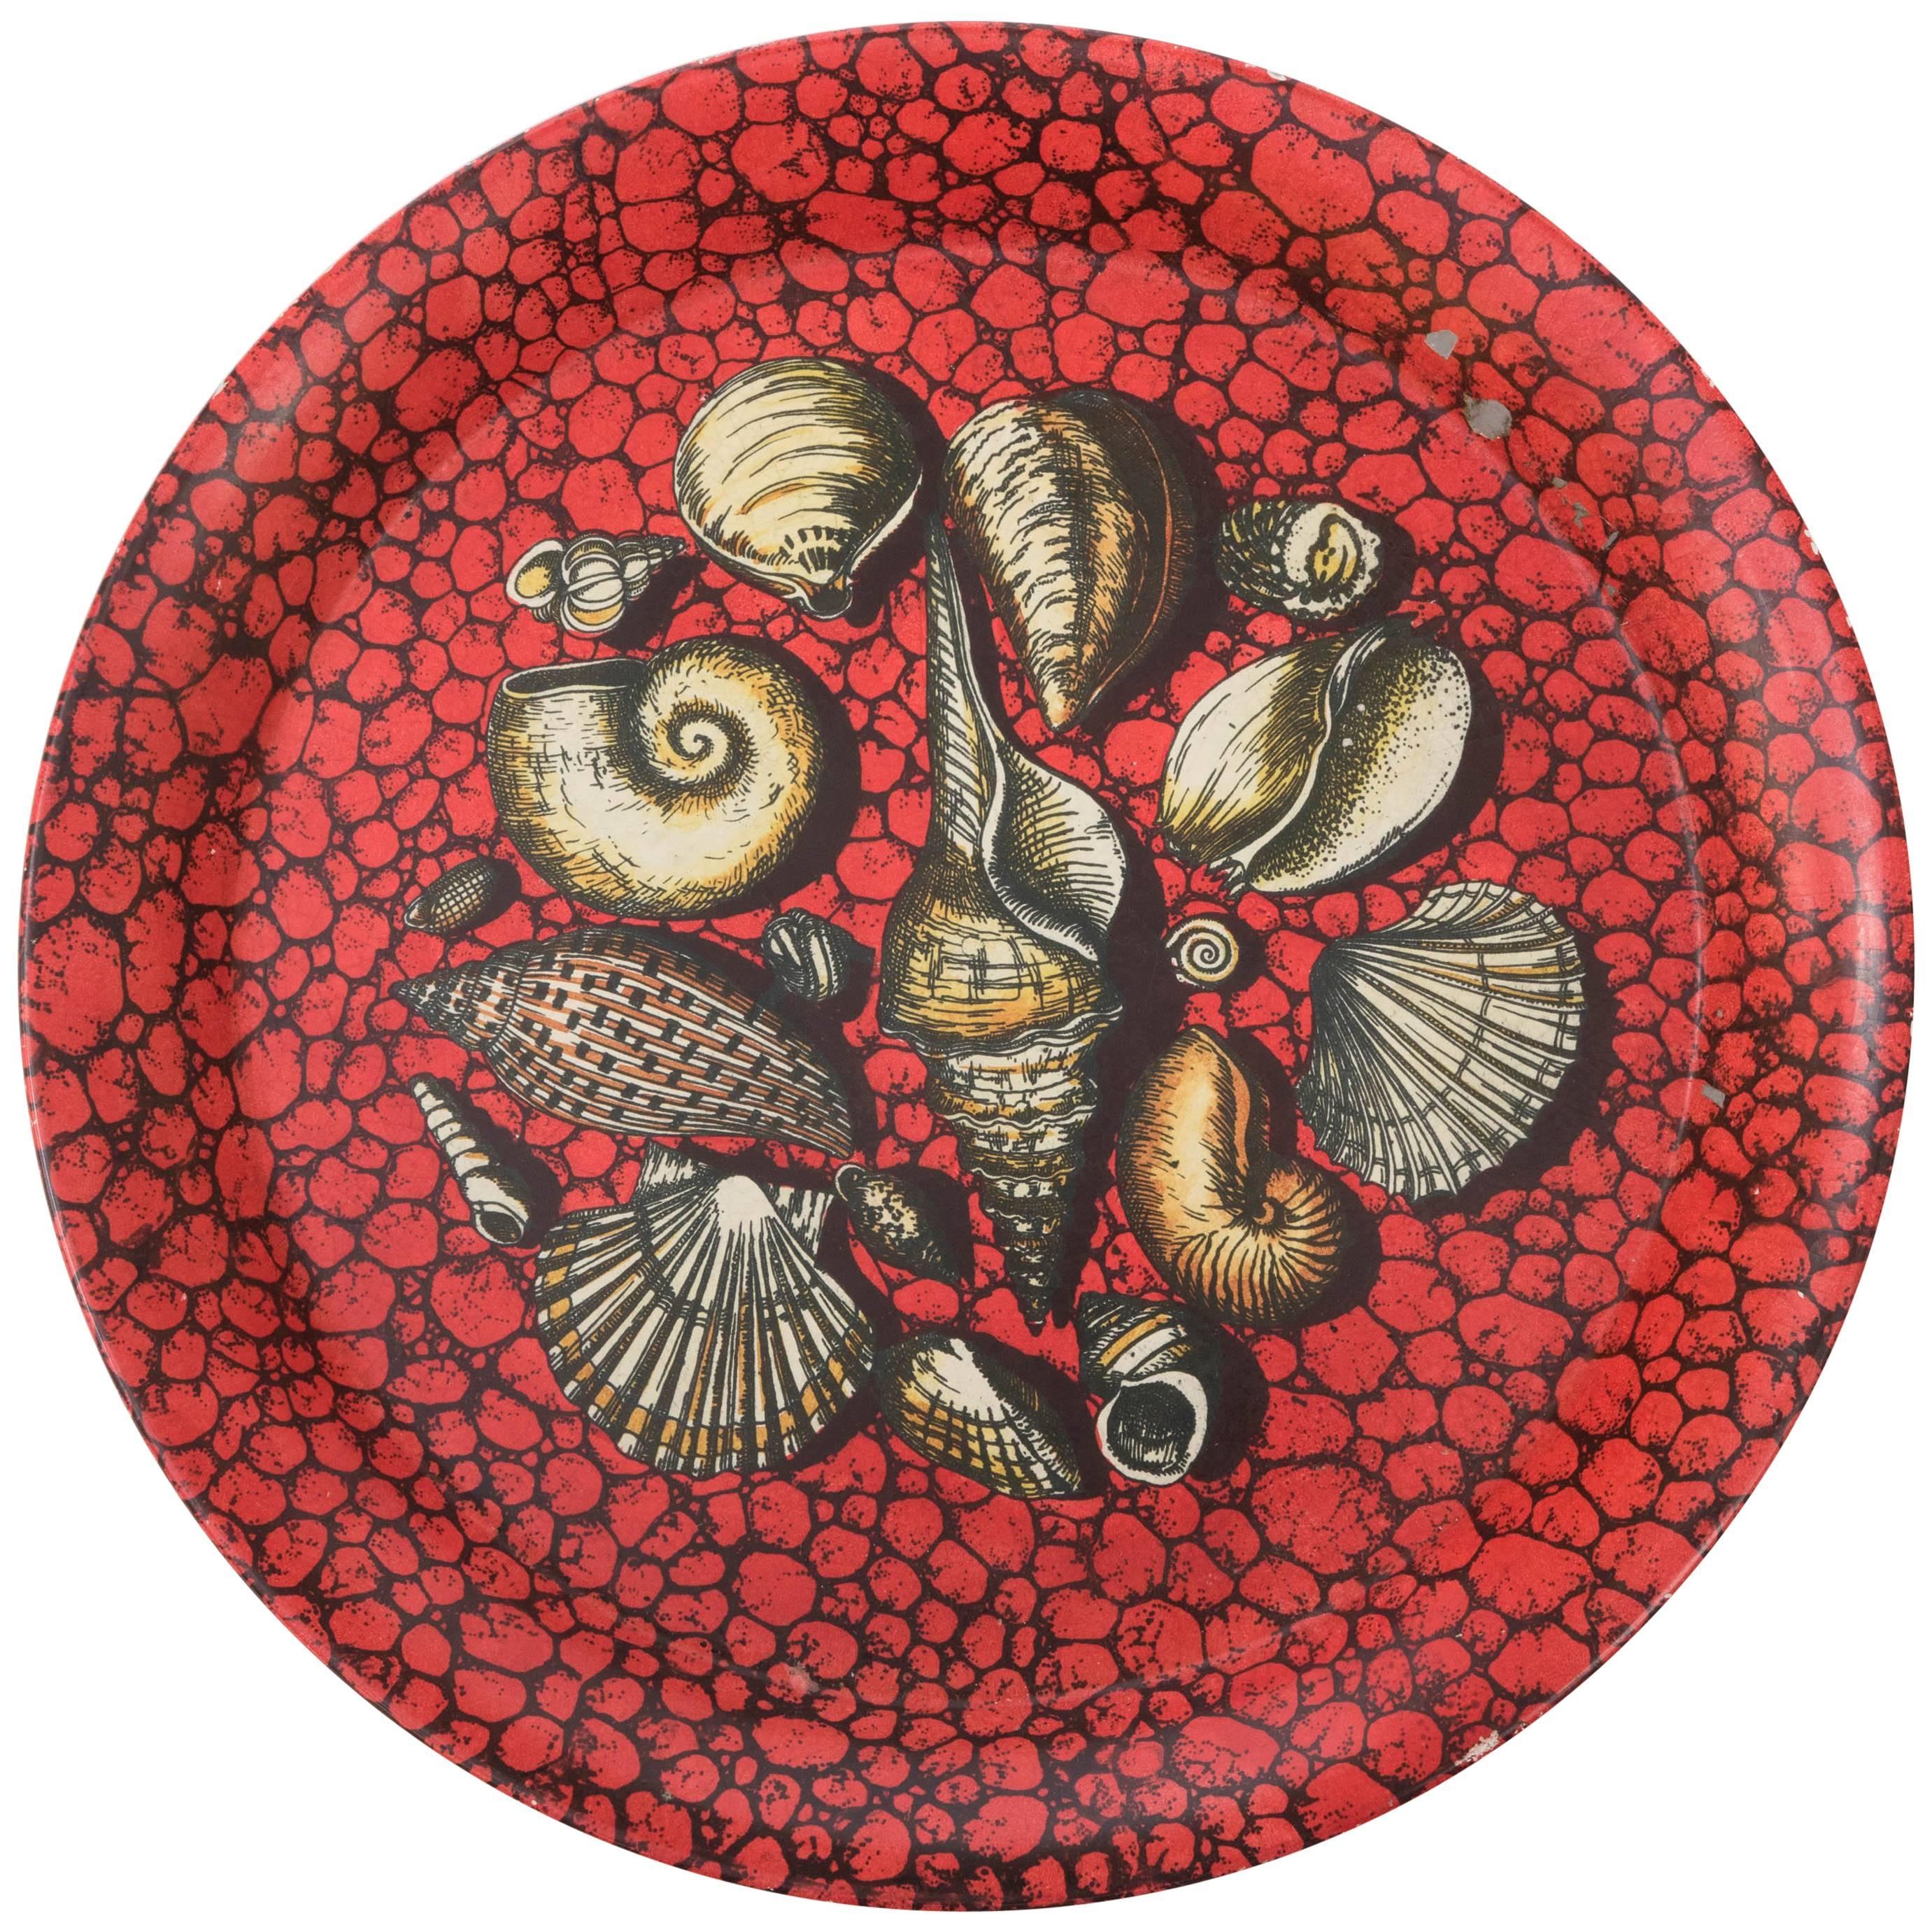 Piero Fornasetti metal serving tray lithographically printed, Italy circa 1950